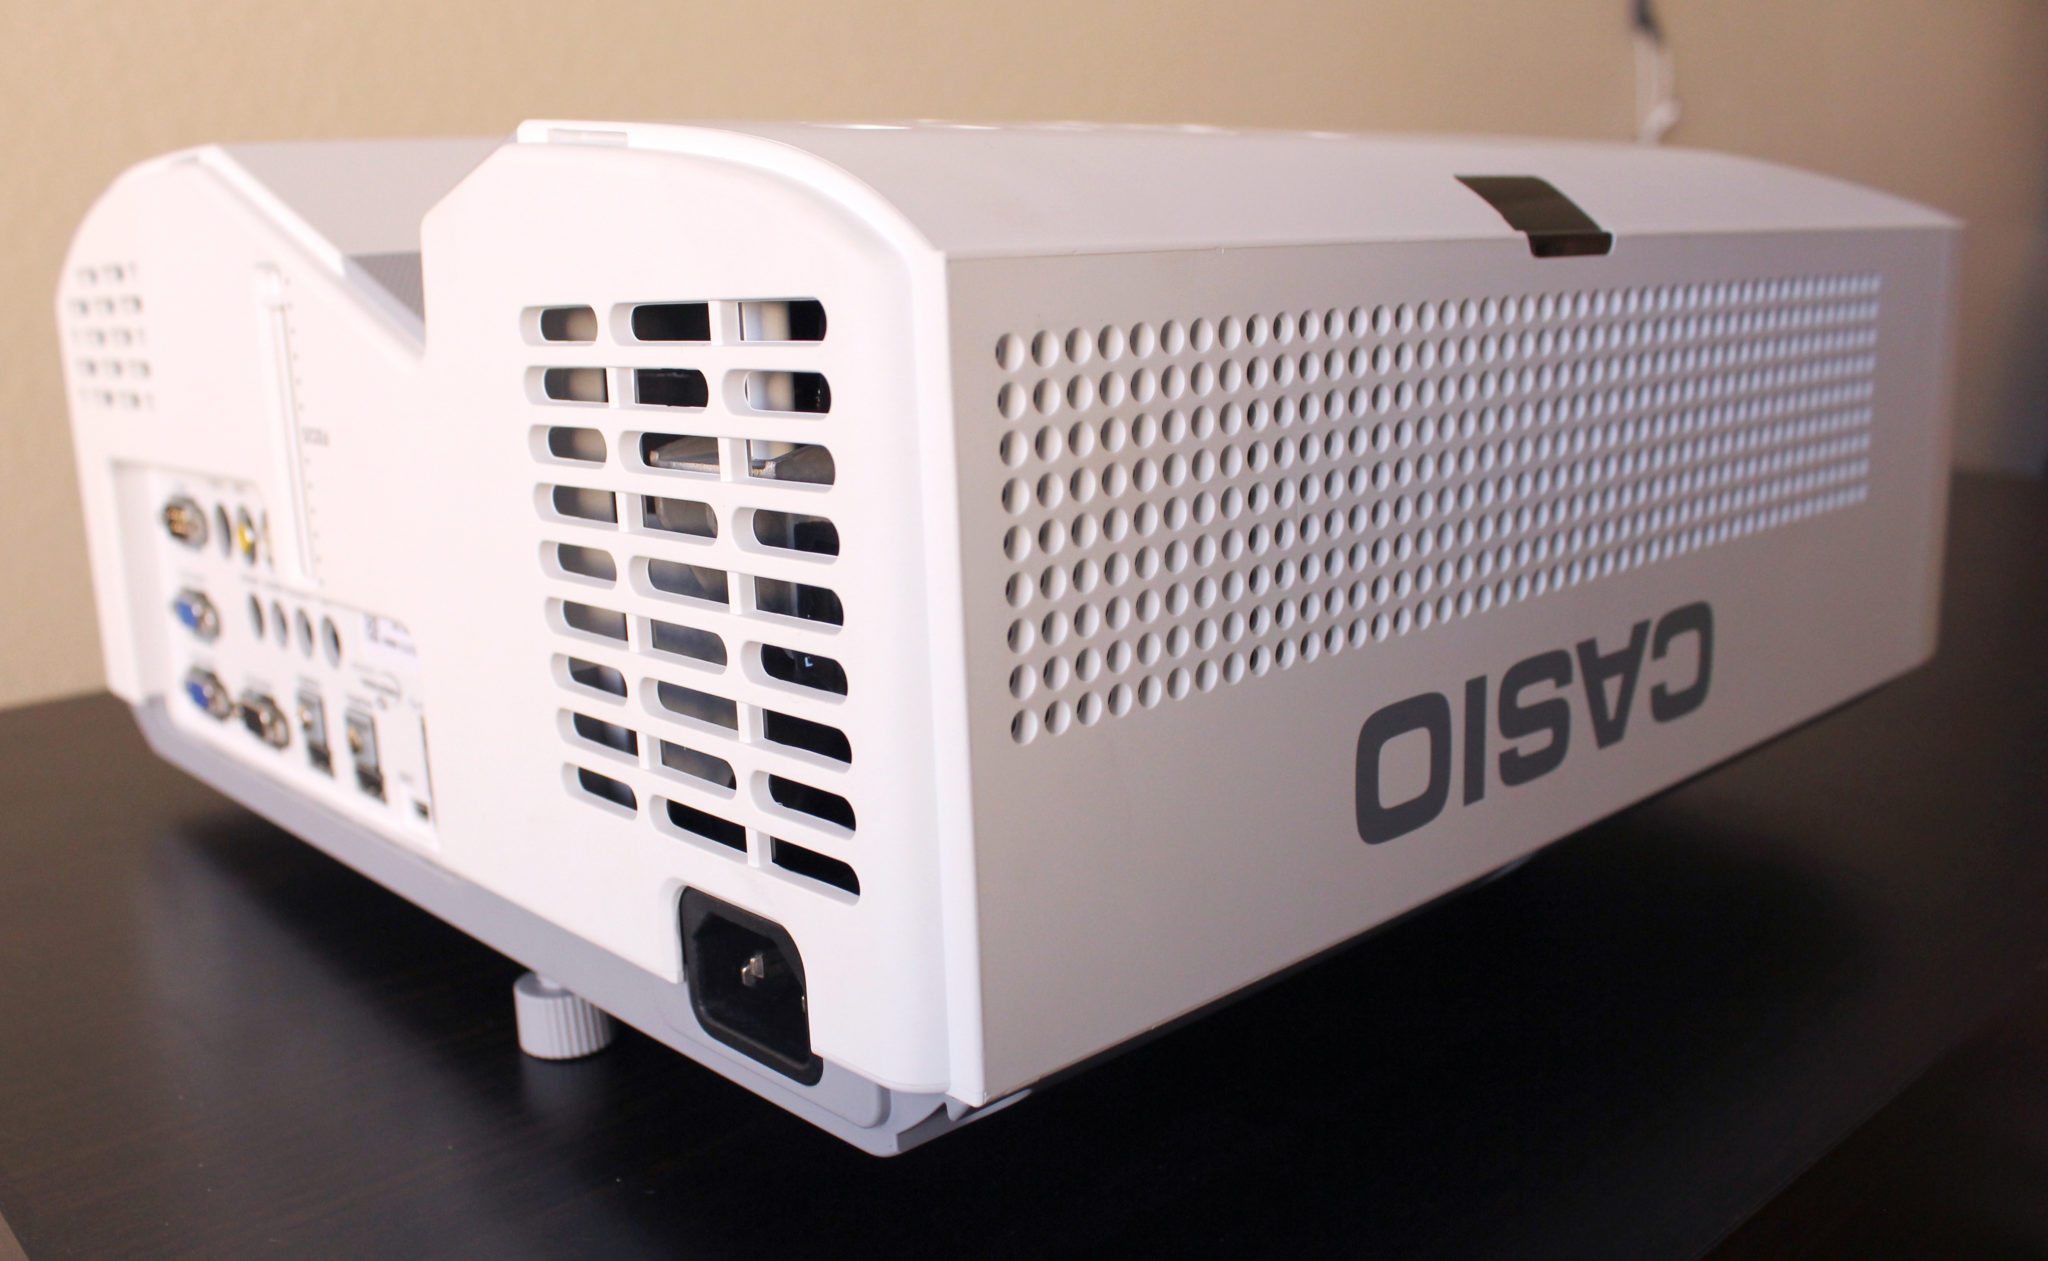 Casio XJ-UT351WN Projector Review – Hardware Tour - Projector Reviews